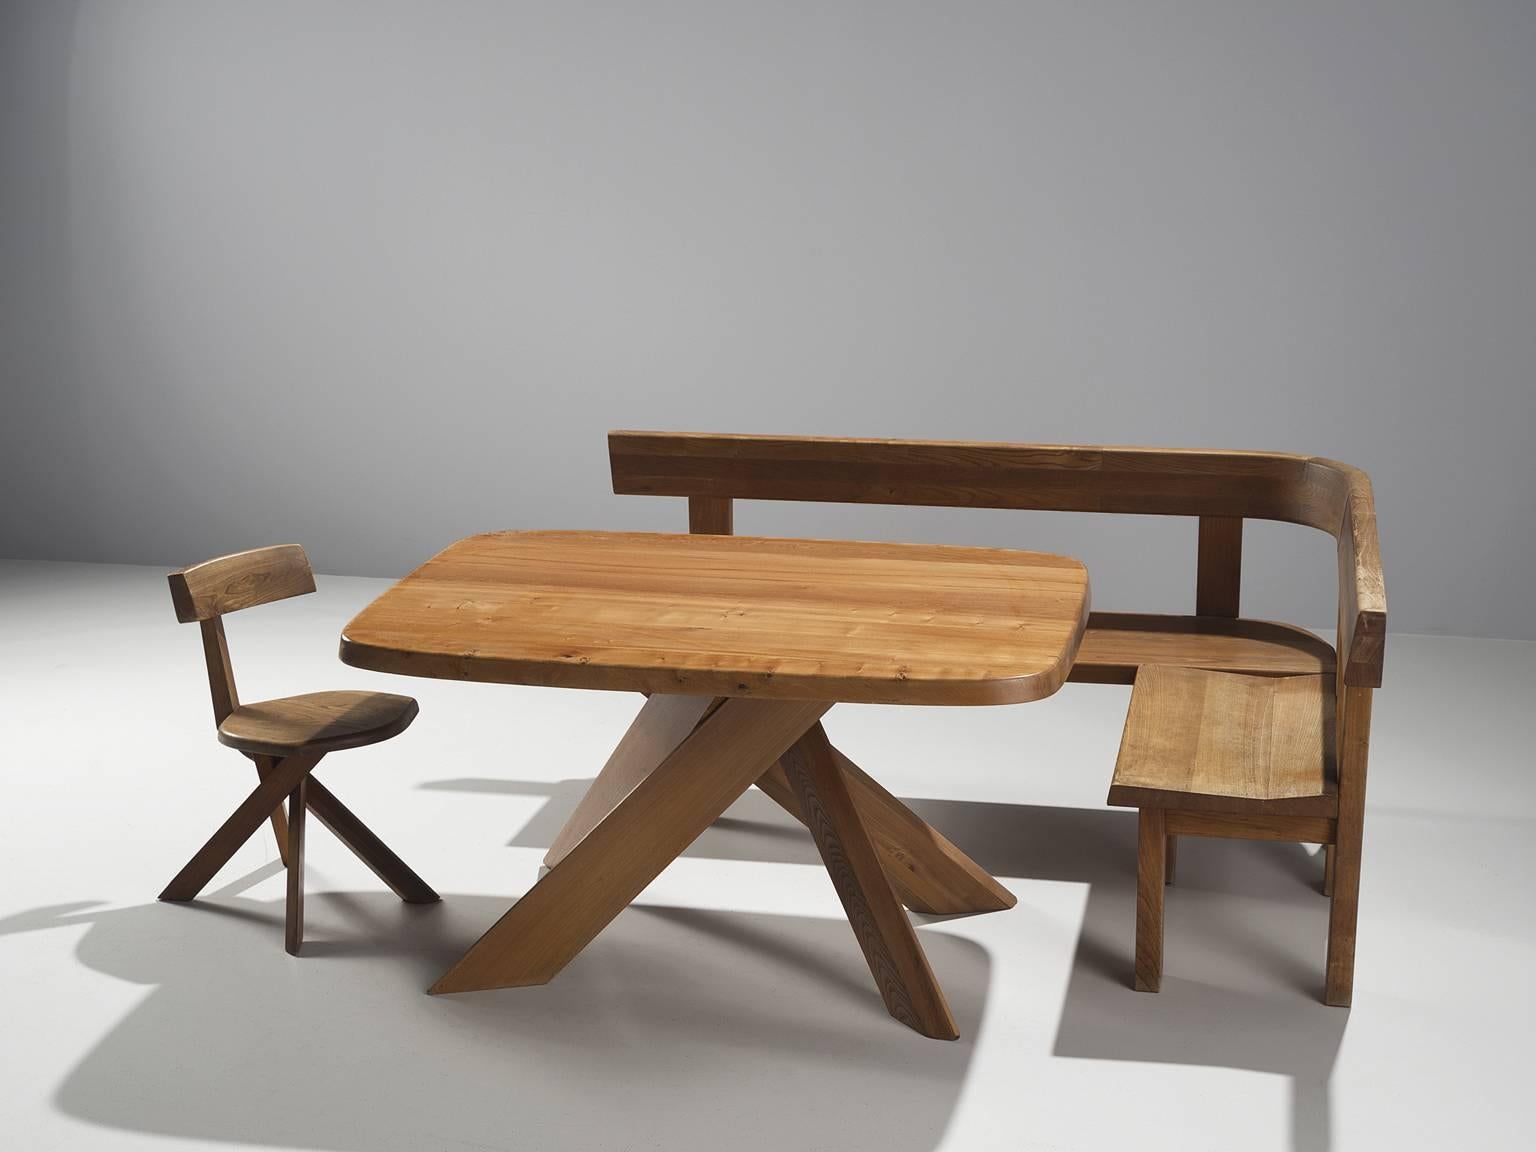 Dining set, solid elmwood by Pierre Chapo, France, 1960s.

The basic design and construction, as well as the use of solid elmwood characterizes the work of Chapo. The interesting base of the table is build with just four legs, with angled edges to